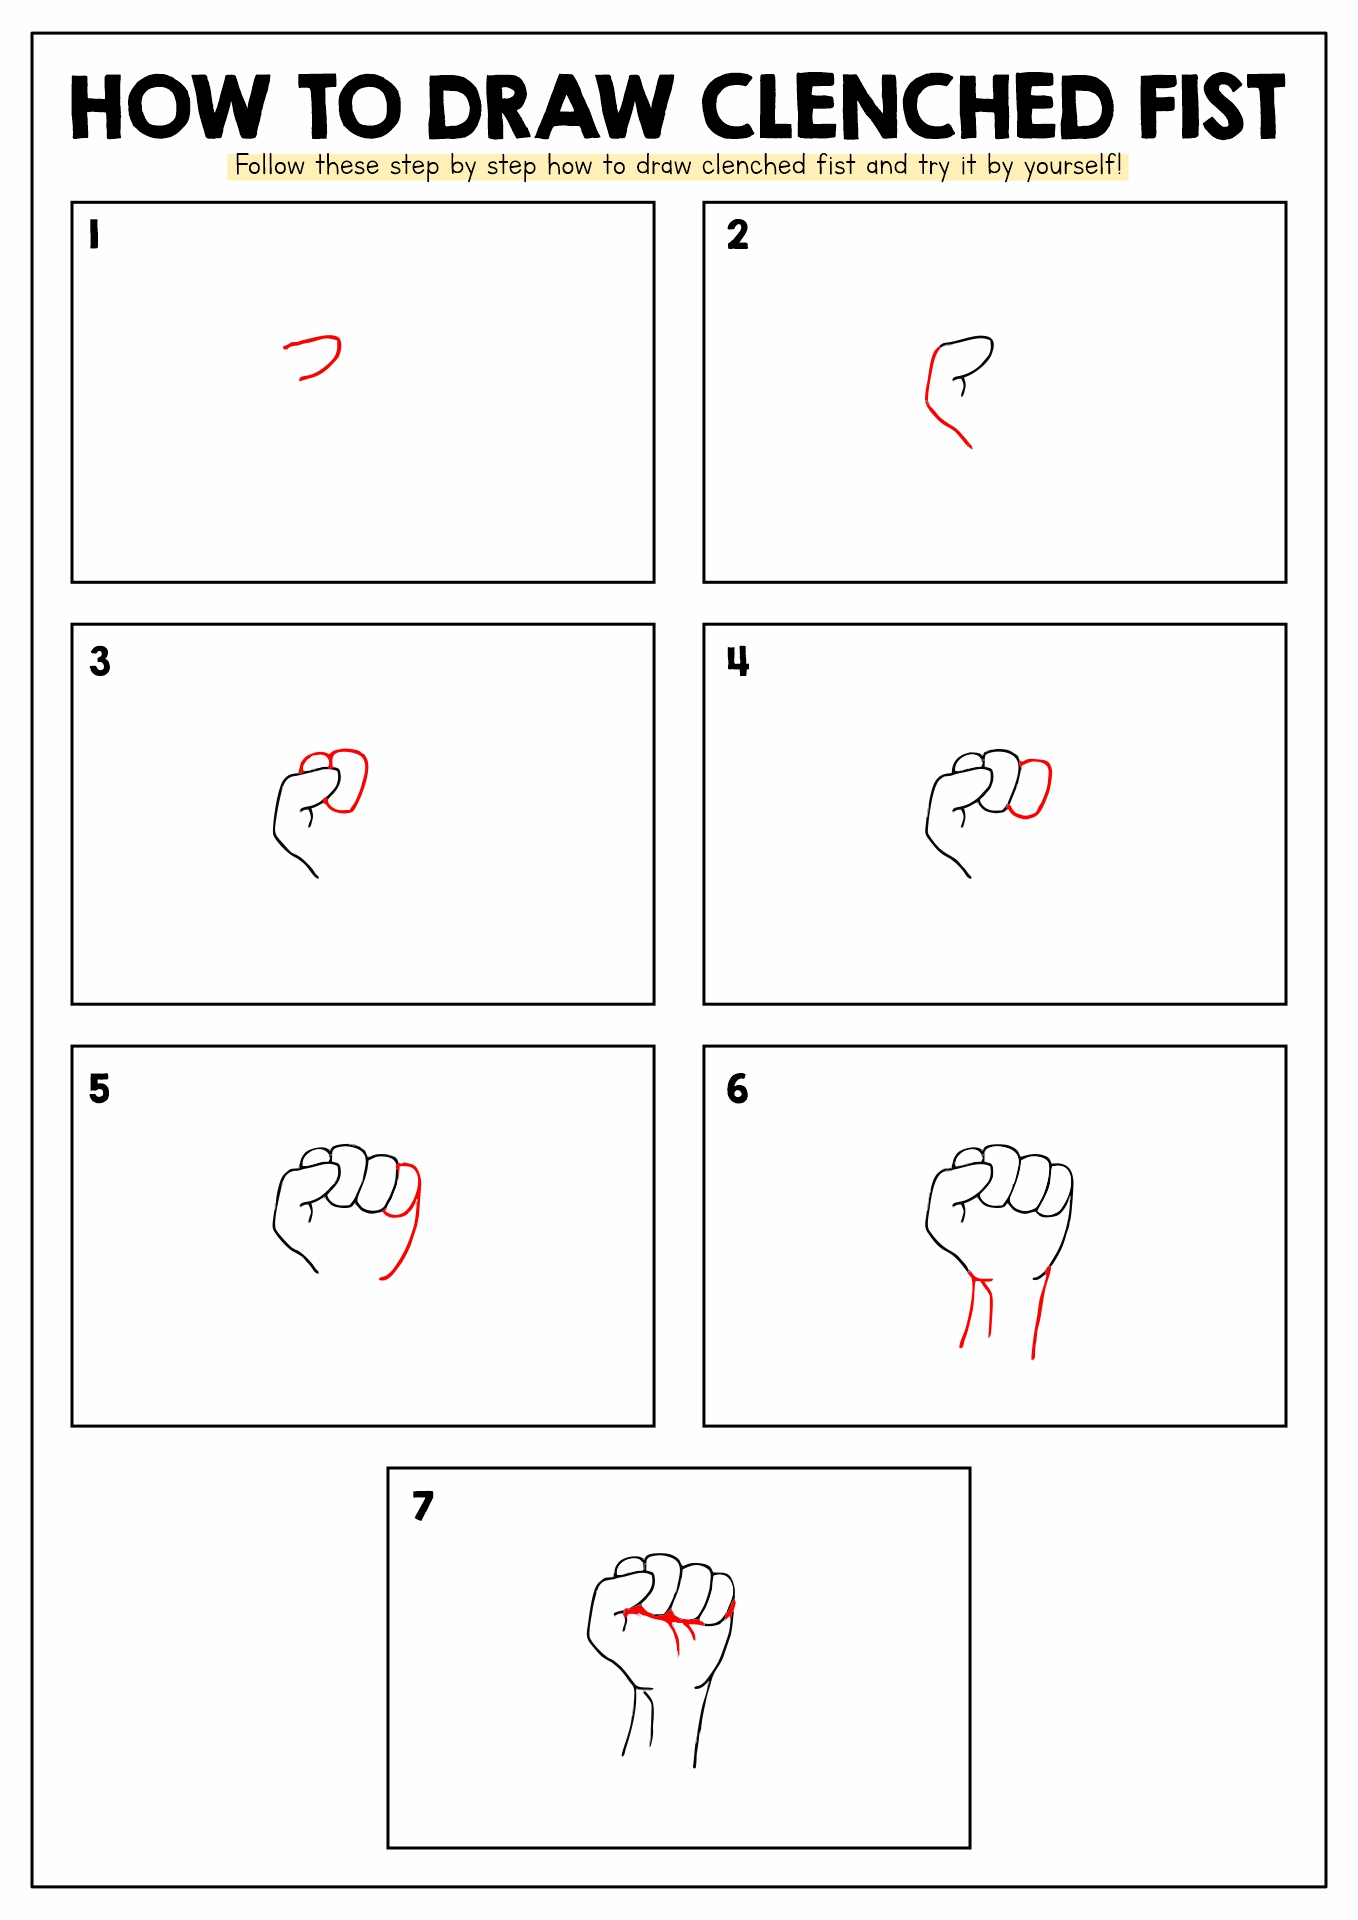 How to Draw Clenched Fist